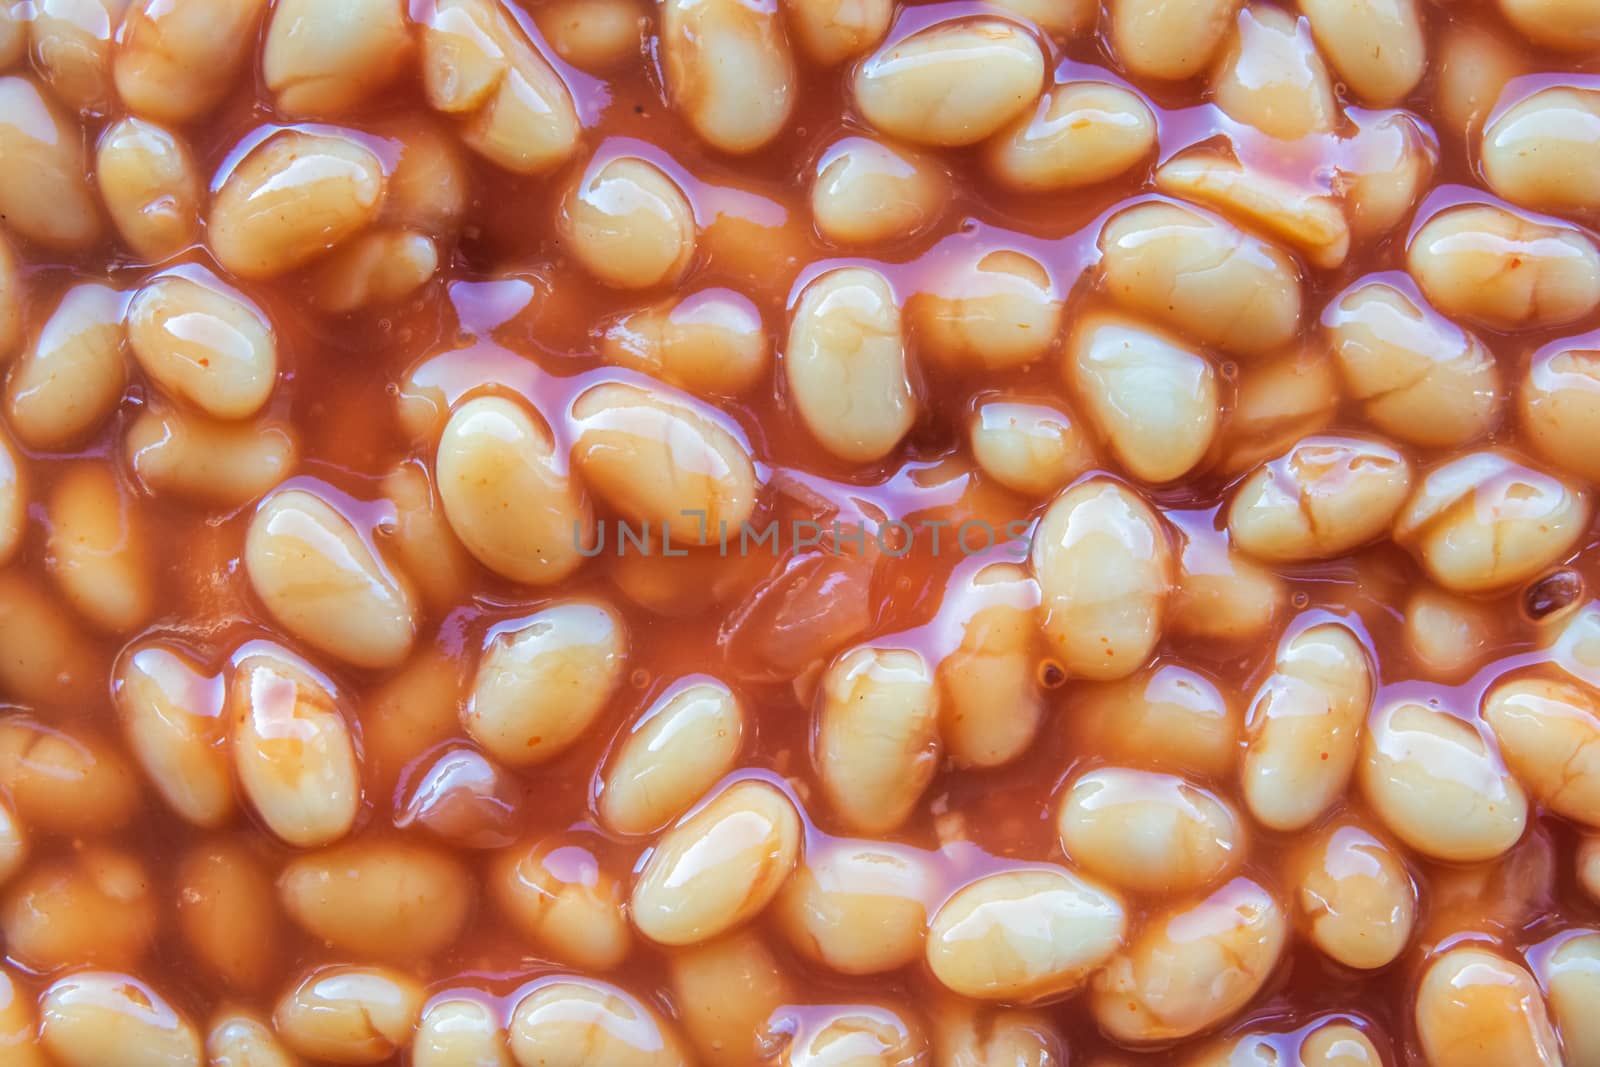 Abstract Background Texture Of Baked Beans In Tomato Sauce